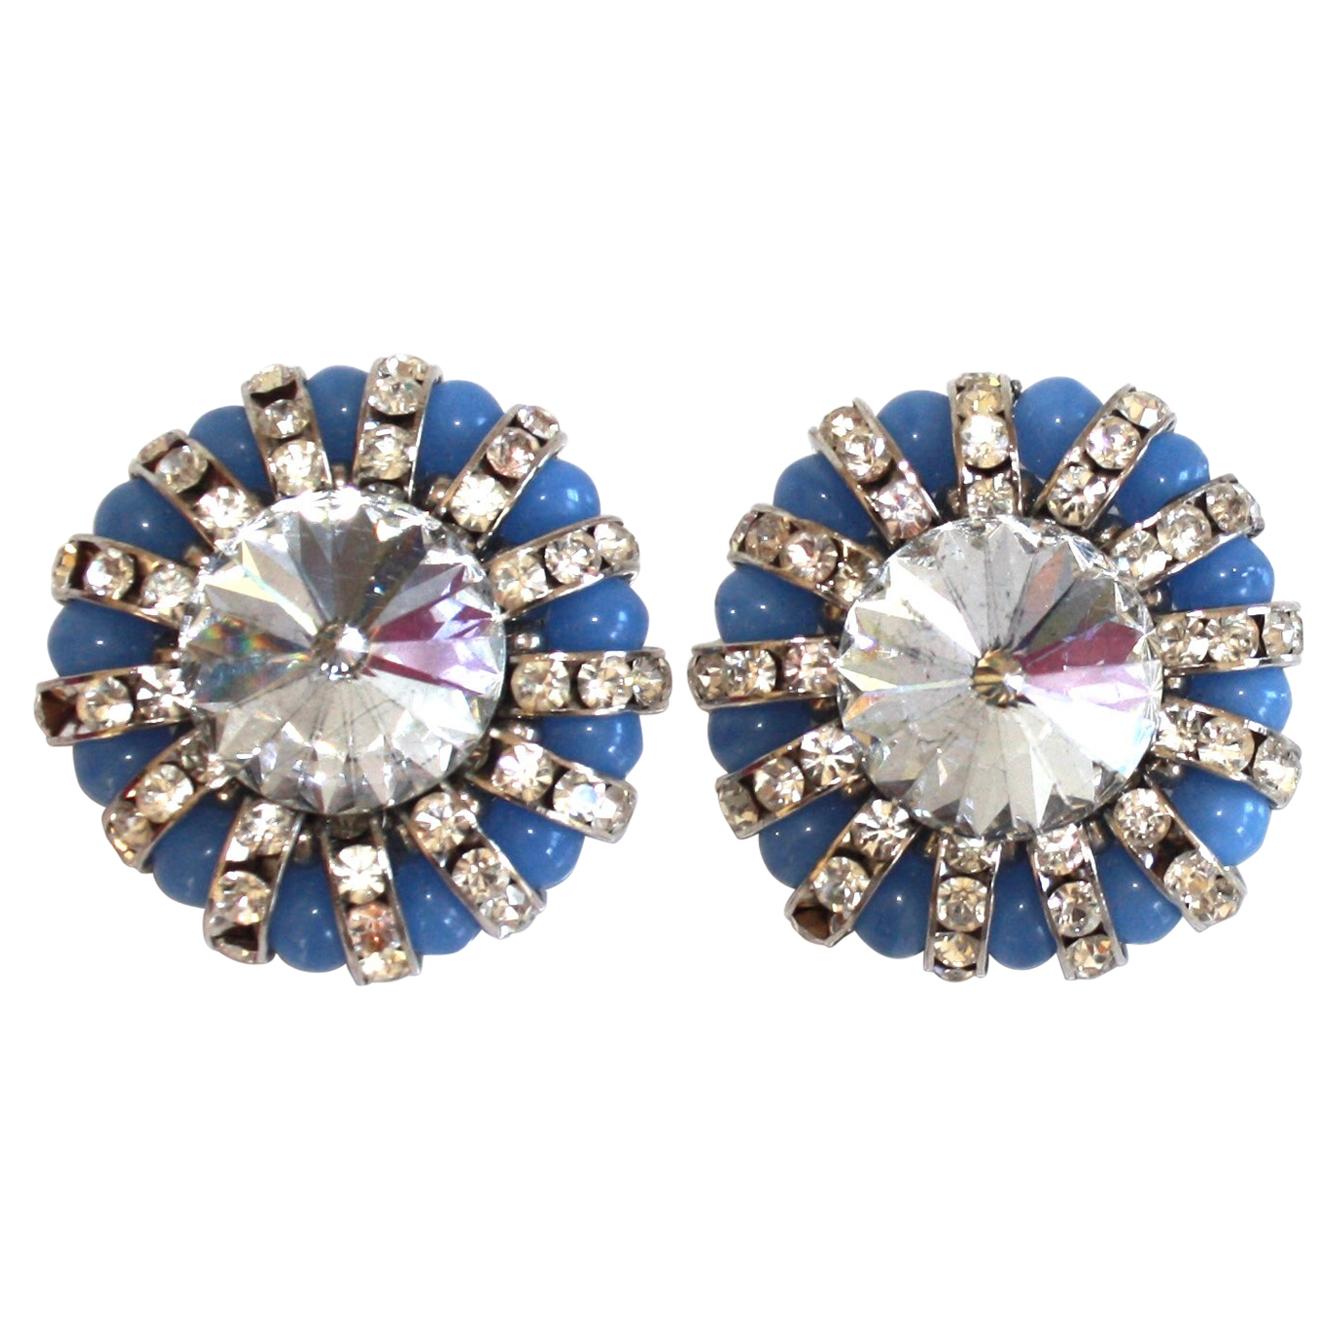 Francoise Montague Blue Glass and Crystal Clip Earrings